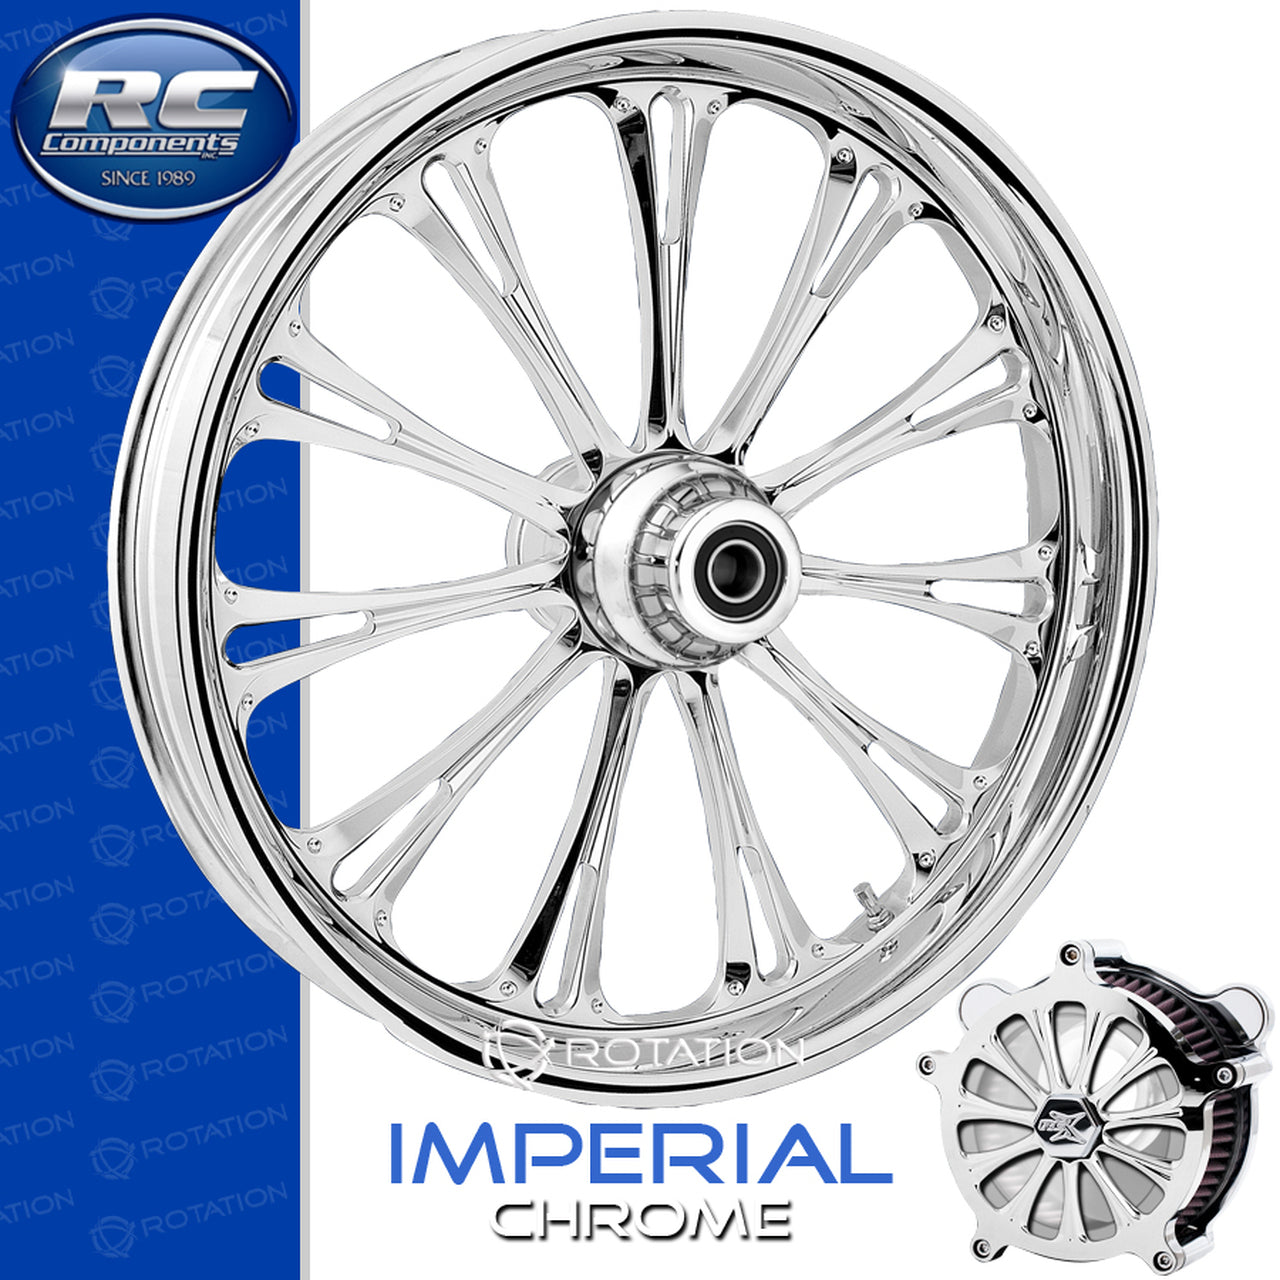 RC Components Imperial Chrome Touring Wheel